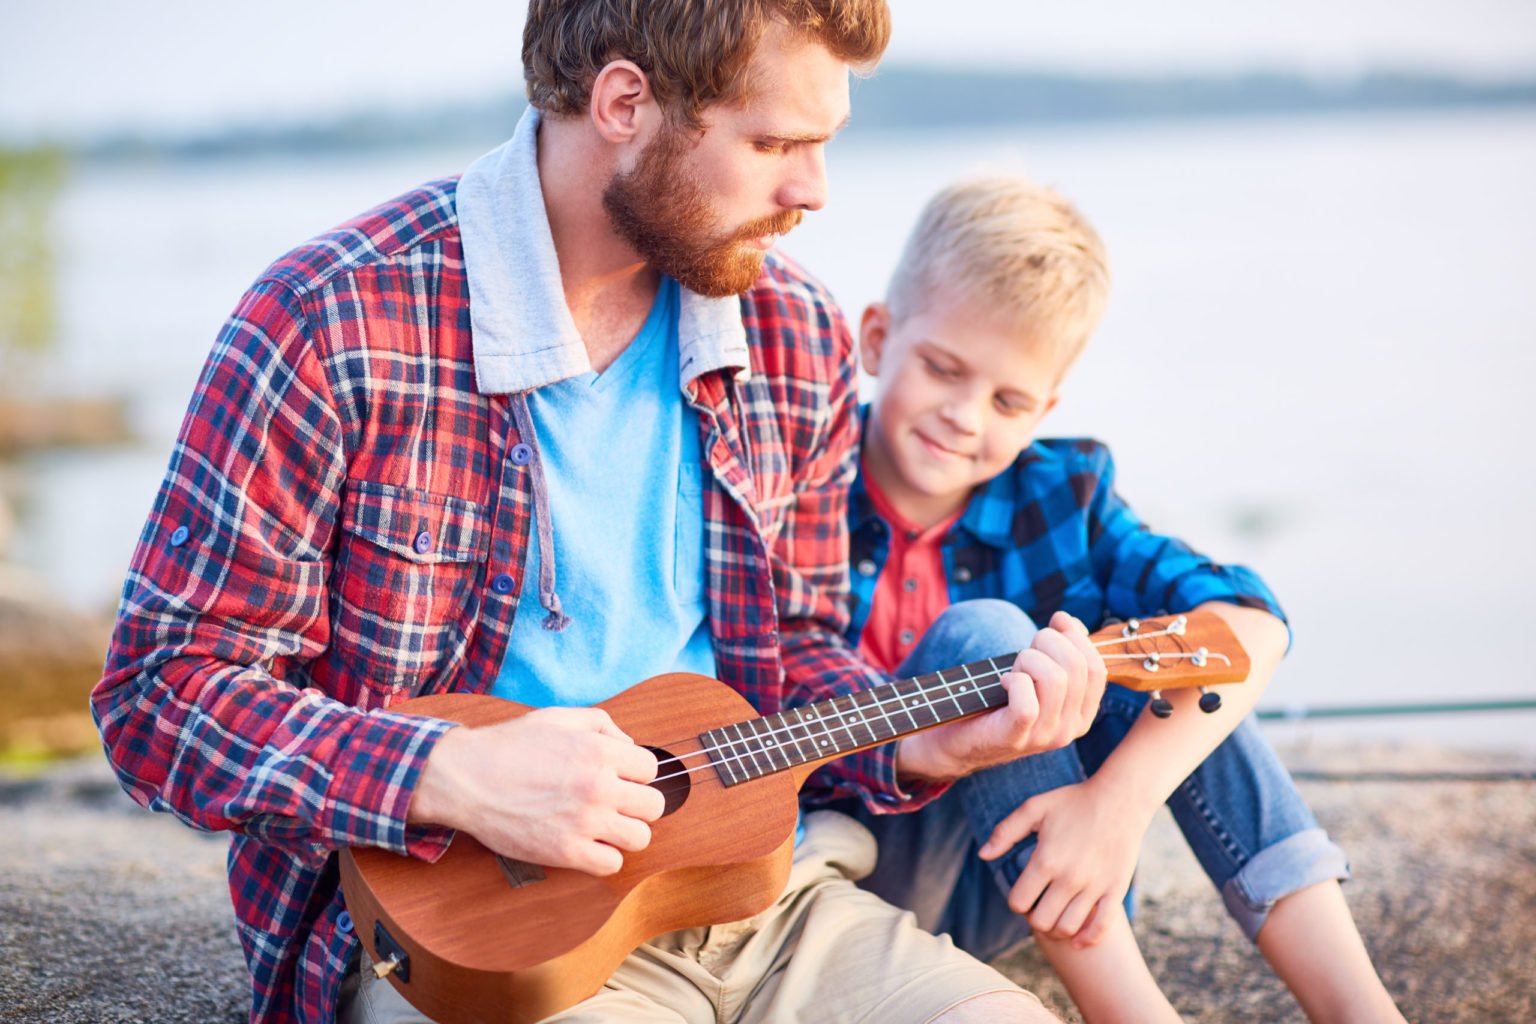 a person playing a guitar with a young boy sitting on a bench